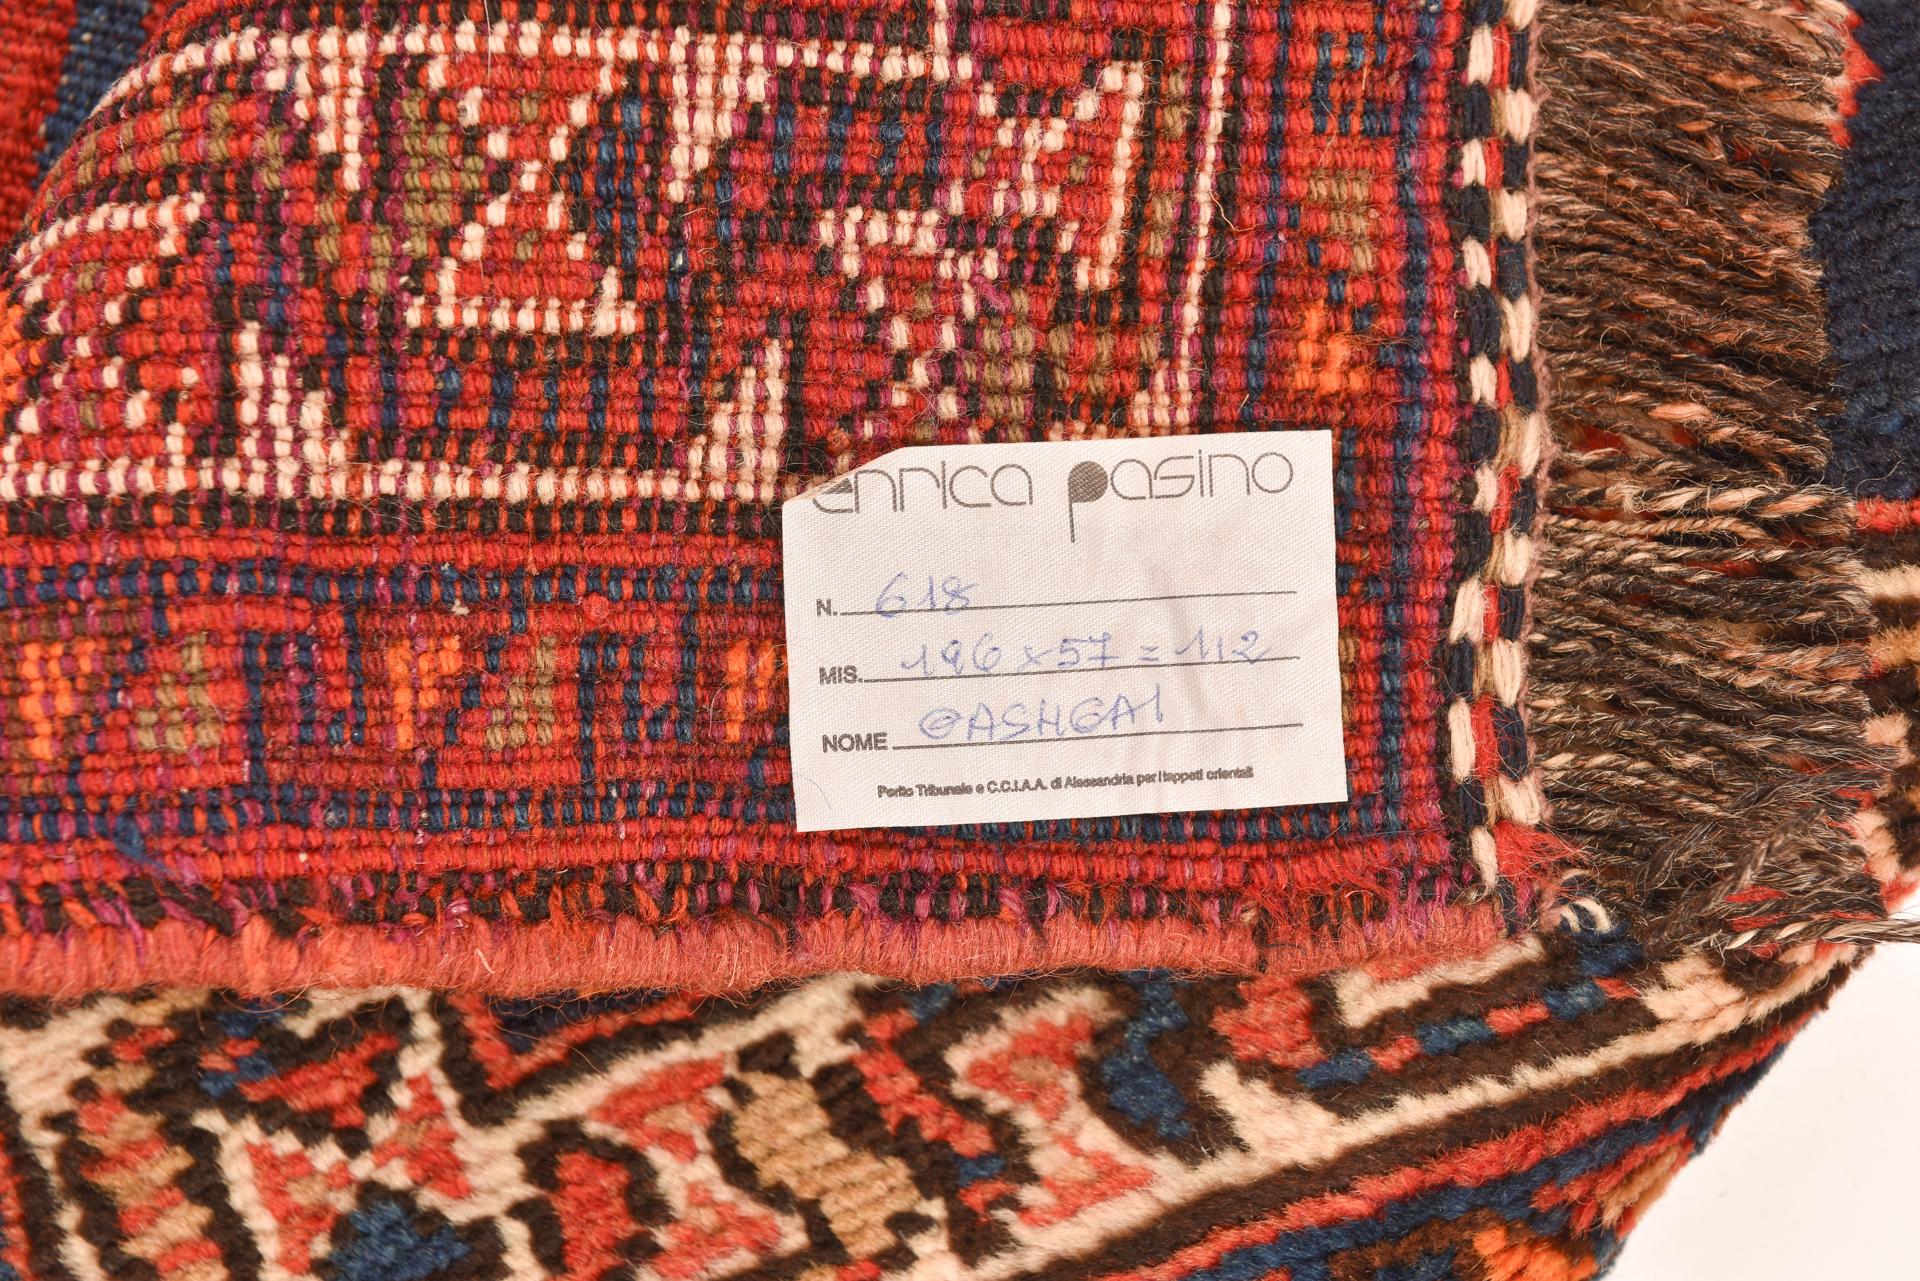 nr. 618 - From an ancient saddlebag, opened, I created a small runner with two side squares woven like a carpet and the central part with a thick kilim with thin stripes: pleasant and robust, it can be placed anywhere.